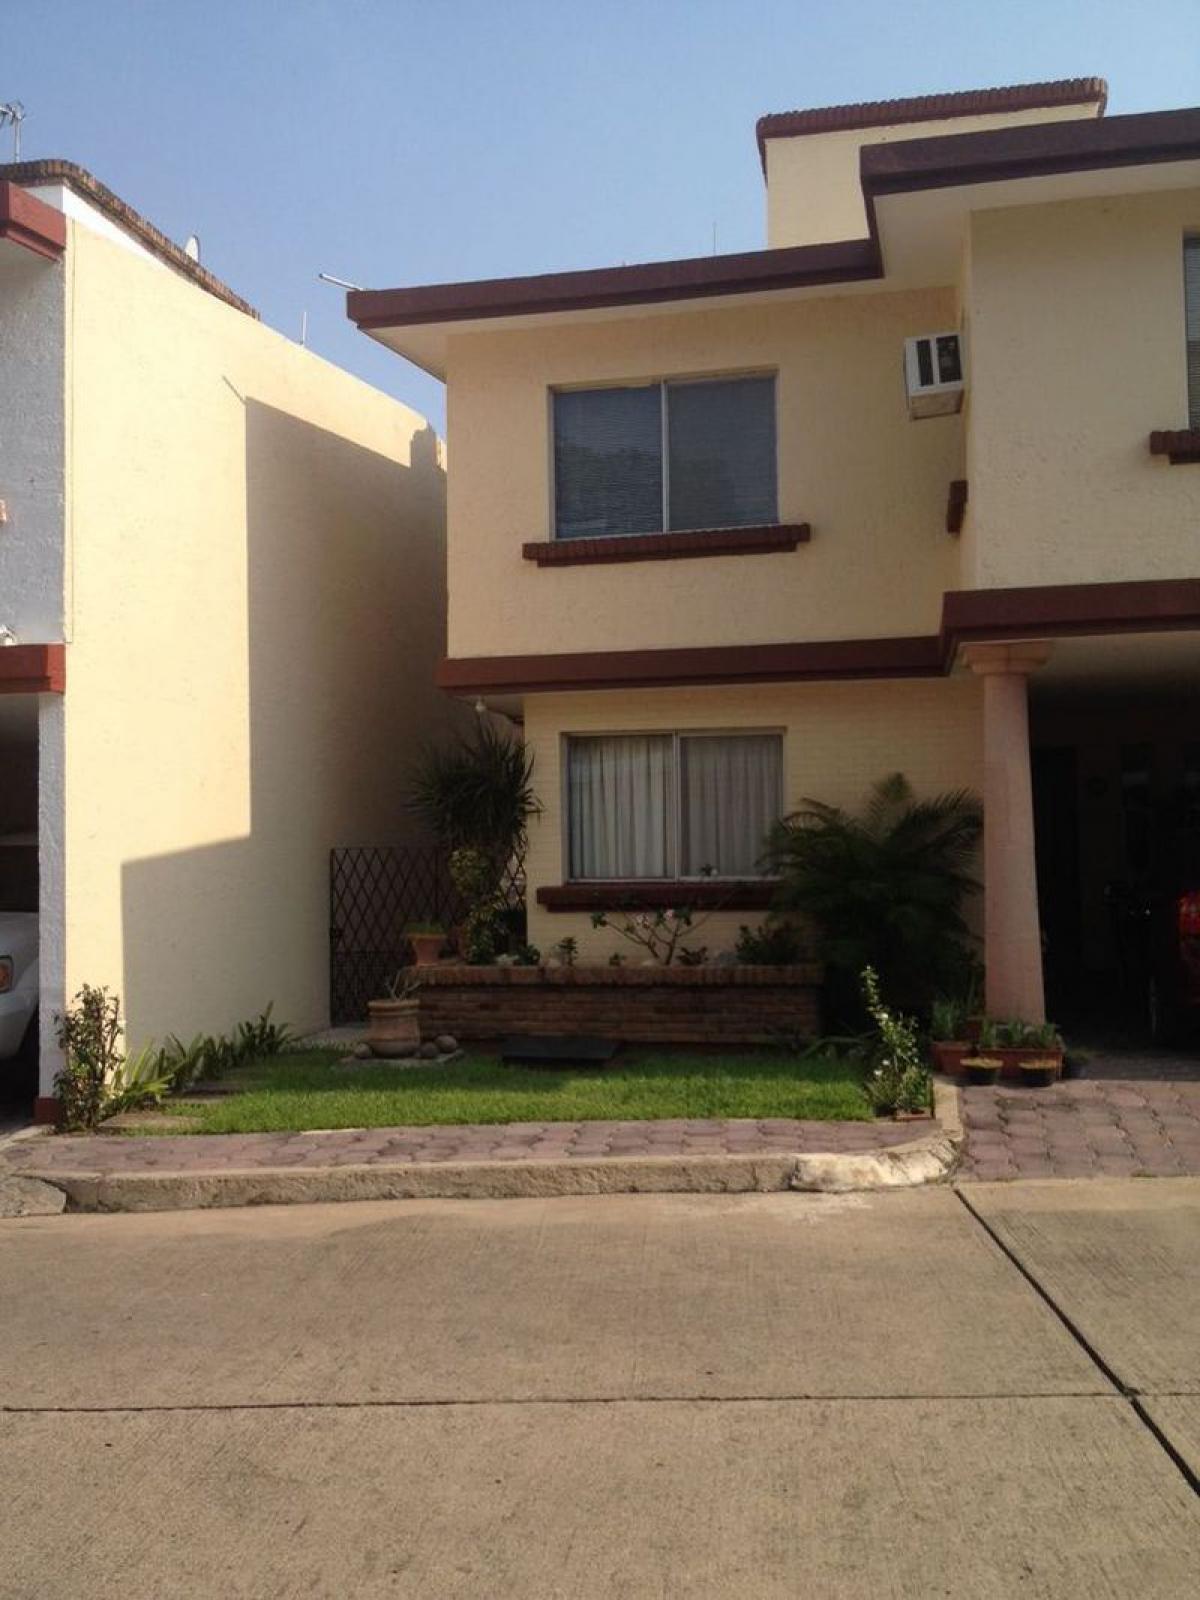 Picture of Apartment For Sale in Tamaulipas, Tamaulipas, Mexico